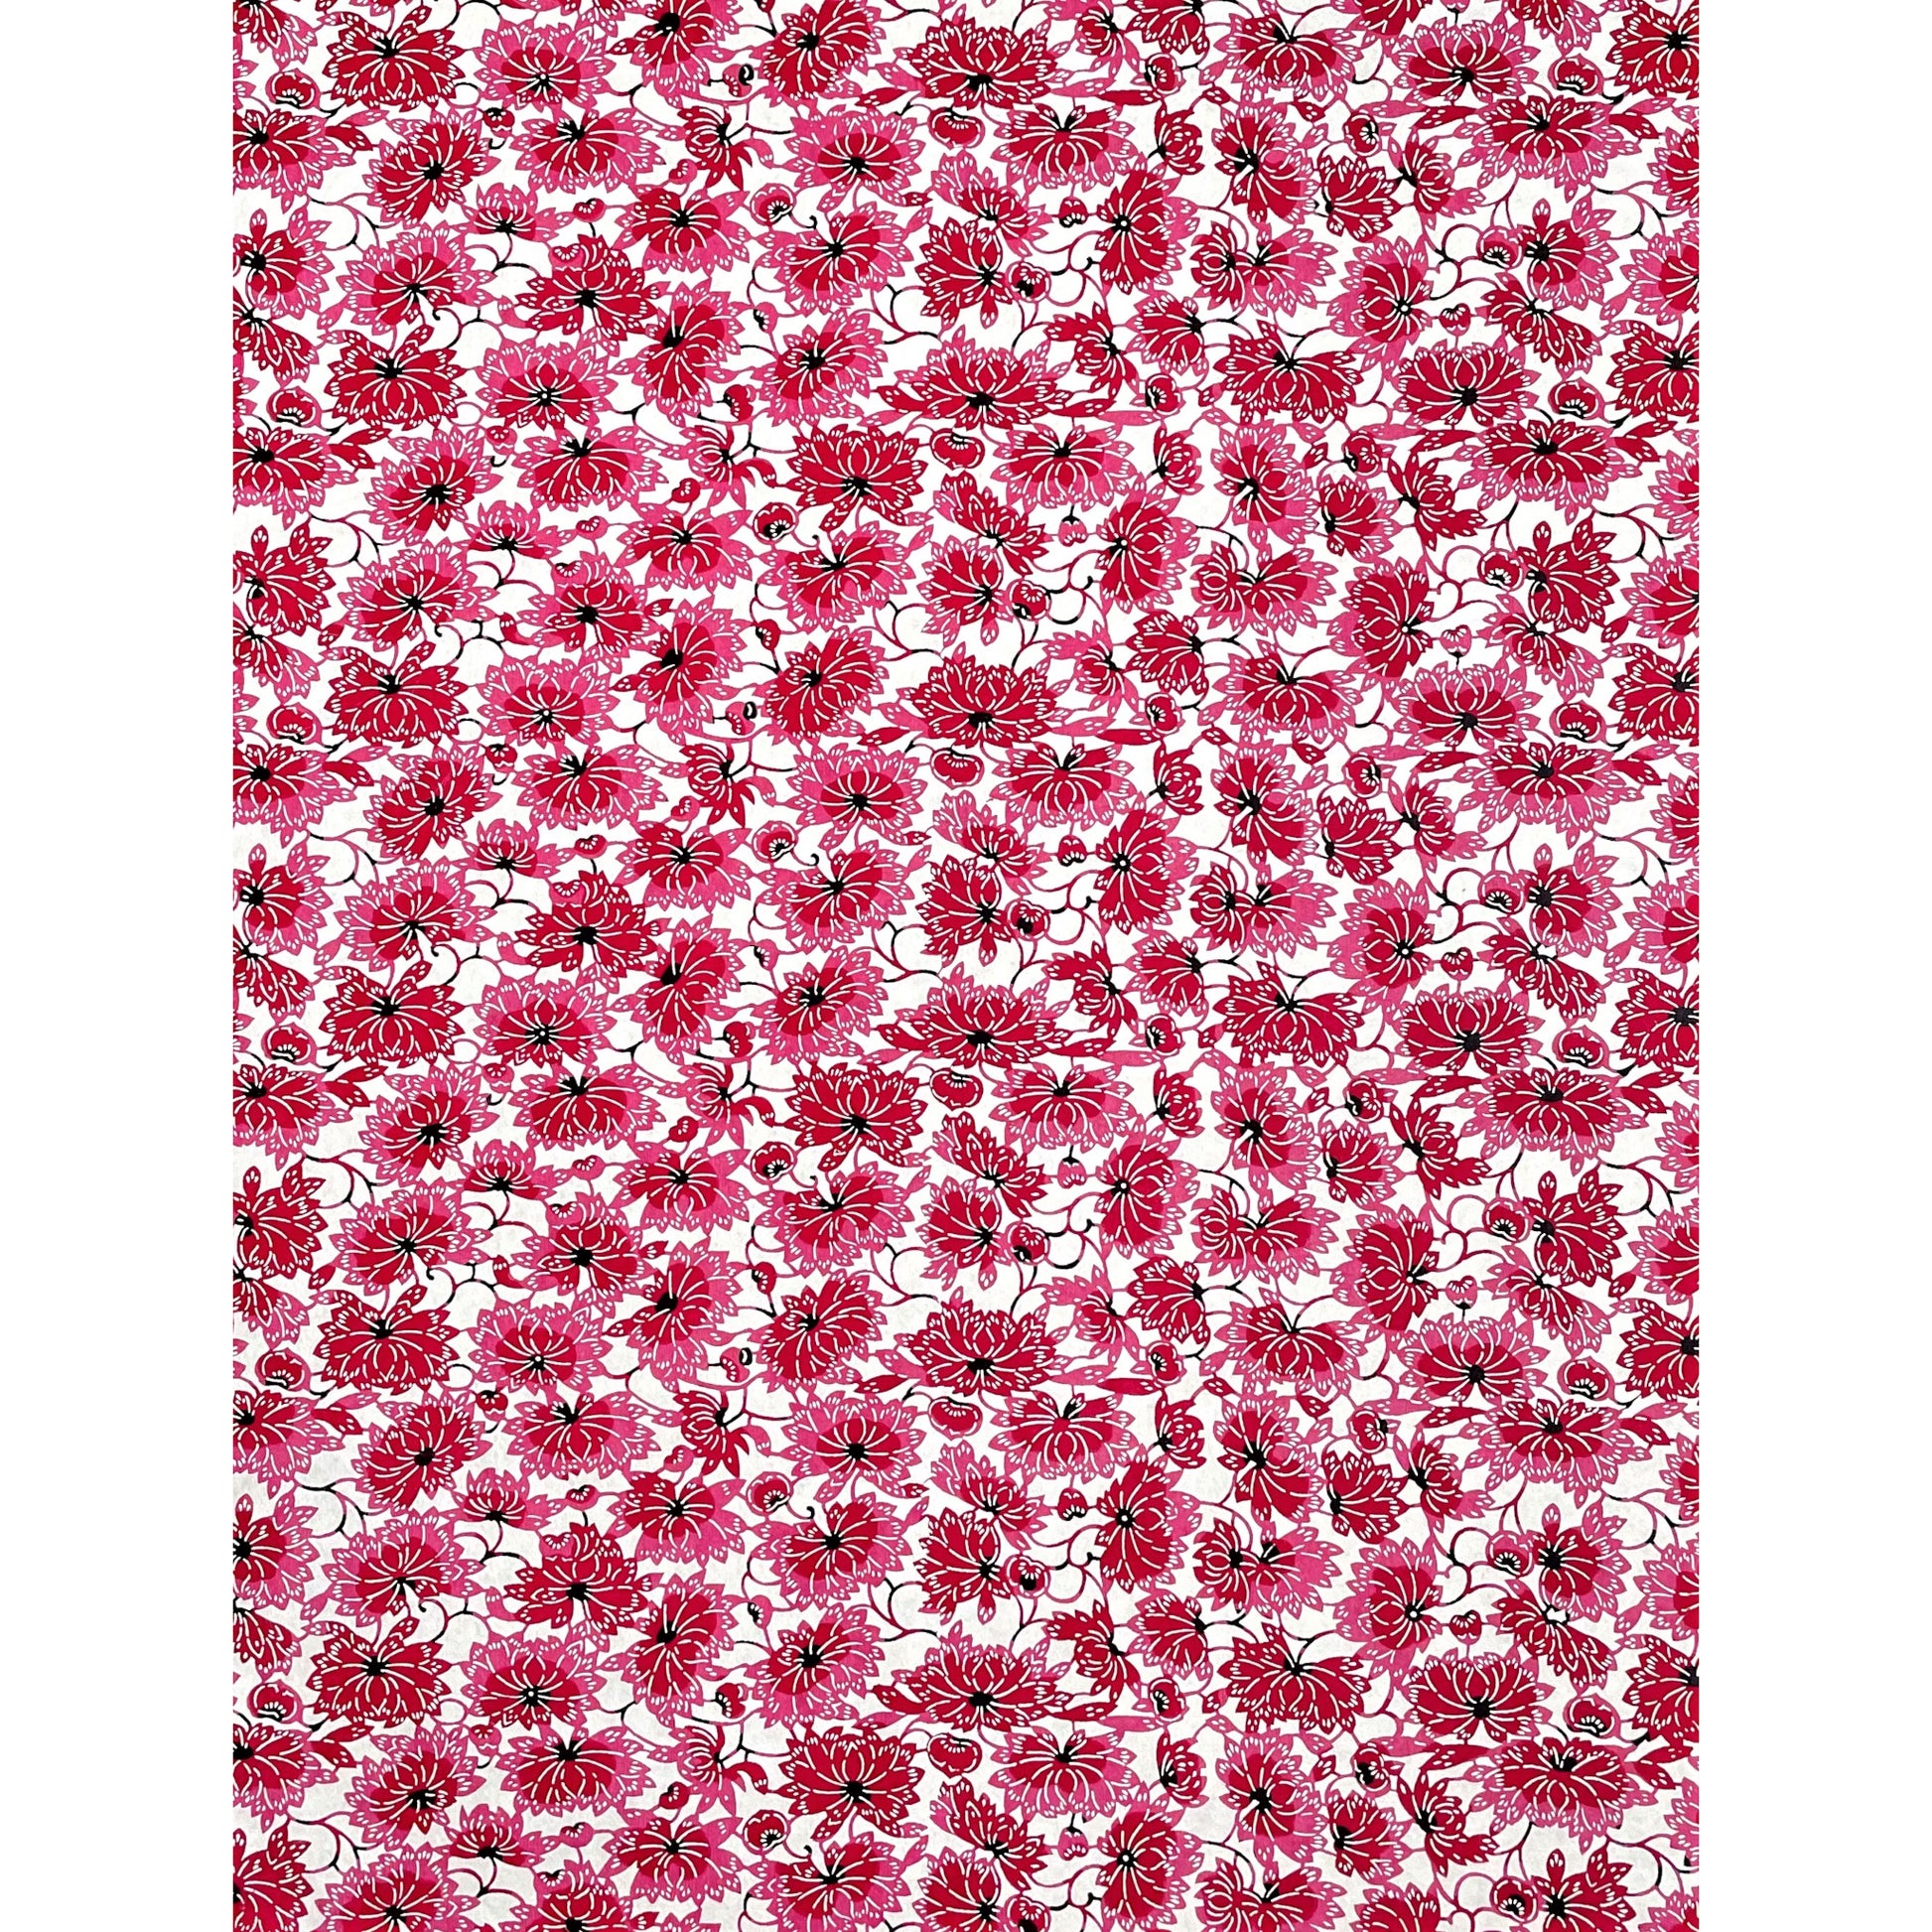 japanese stencil-dyed handmade paper with two-tone pink chrysanthemum repeat pattern, full size sheet